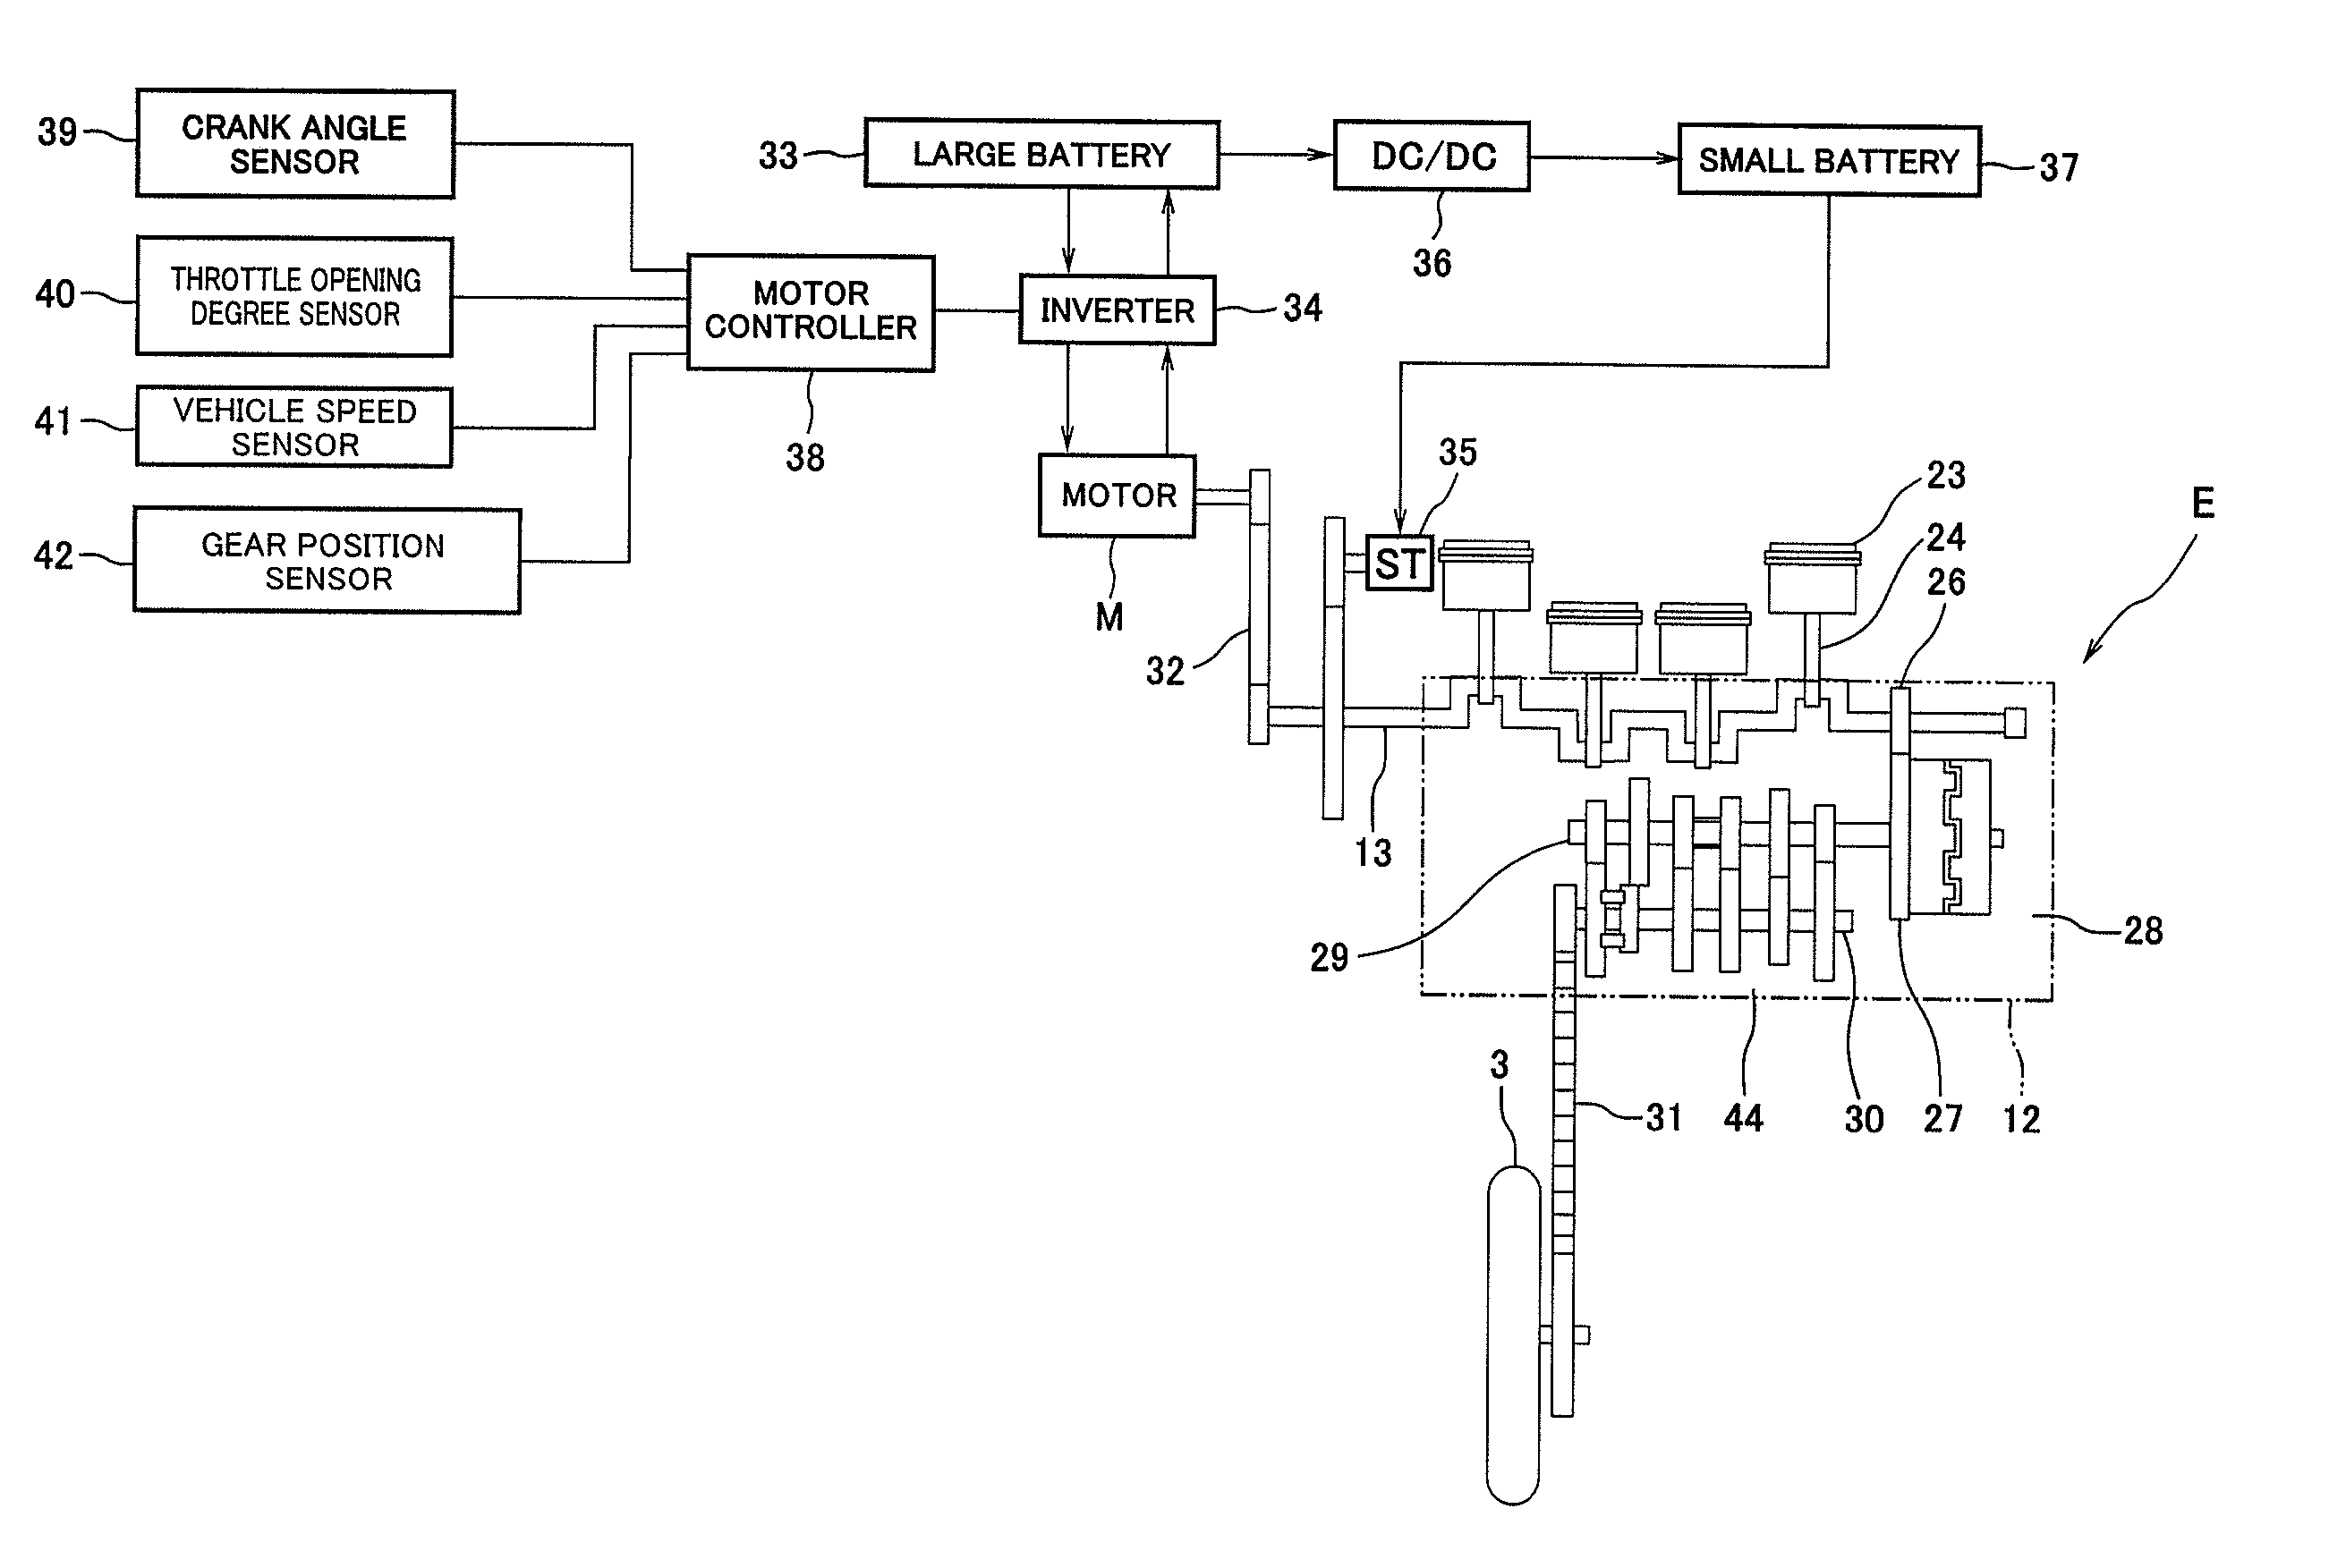 Vehicle and Motor Controller for Vehicle